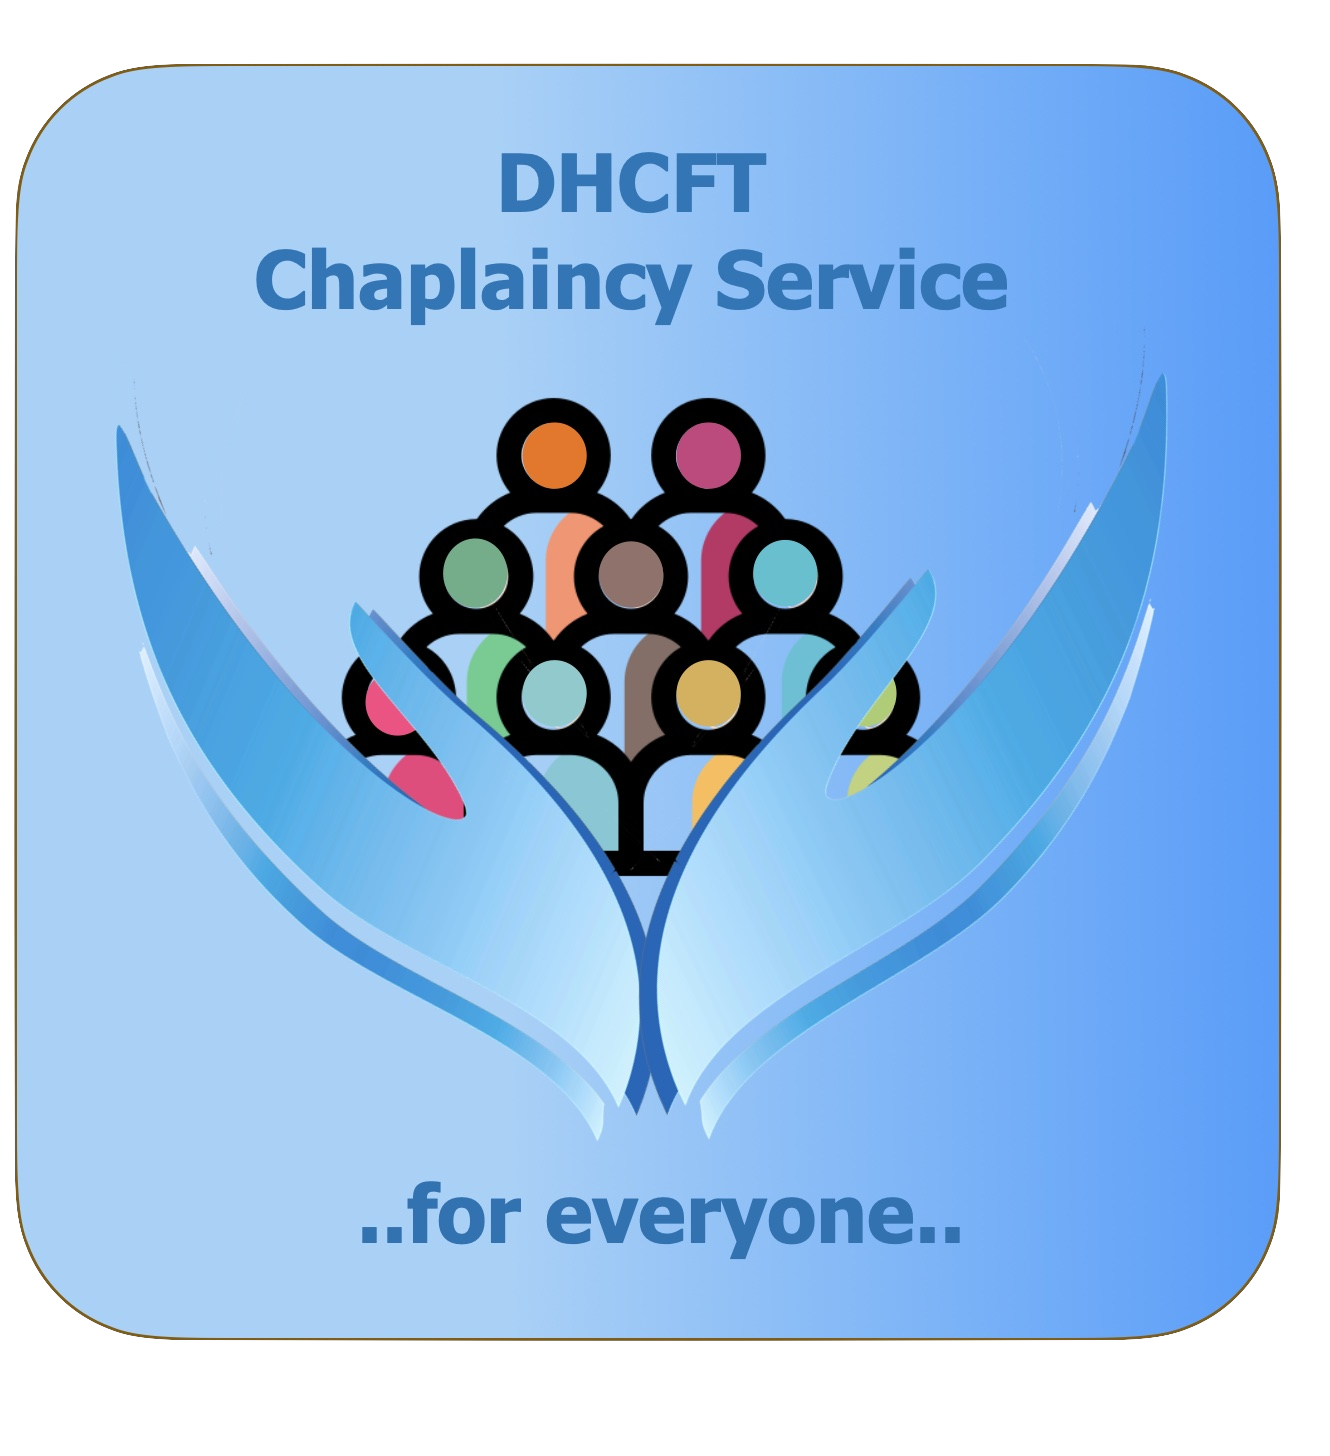 Graphic of people and the words 'DHCFT Chaplaincy Service, for everyone'